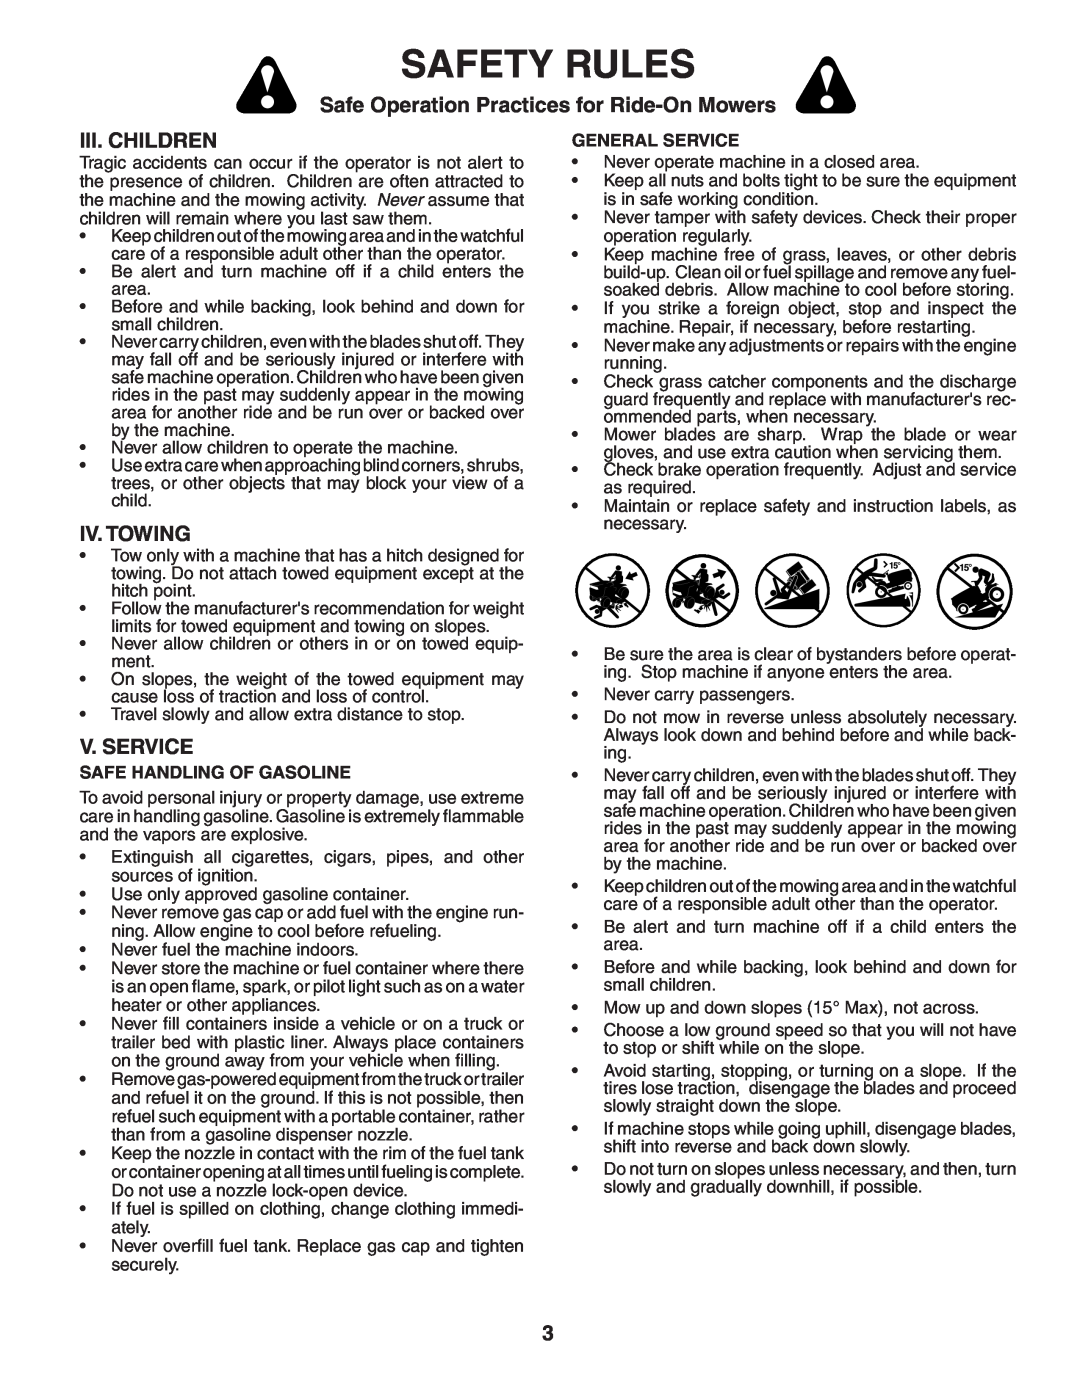 Poulan PB22H54YT manual Iii. Children, Iv. Towing, V. Service, Safety Rules, Safe Operation Practices for Ride-On Mowers 